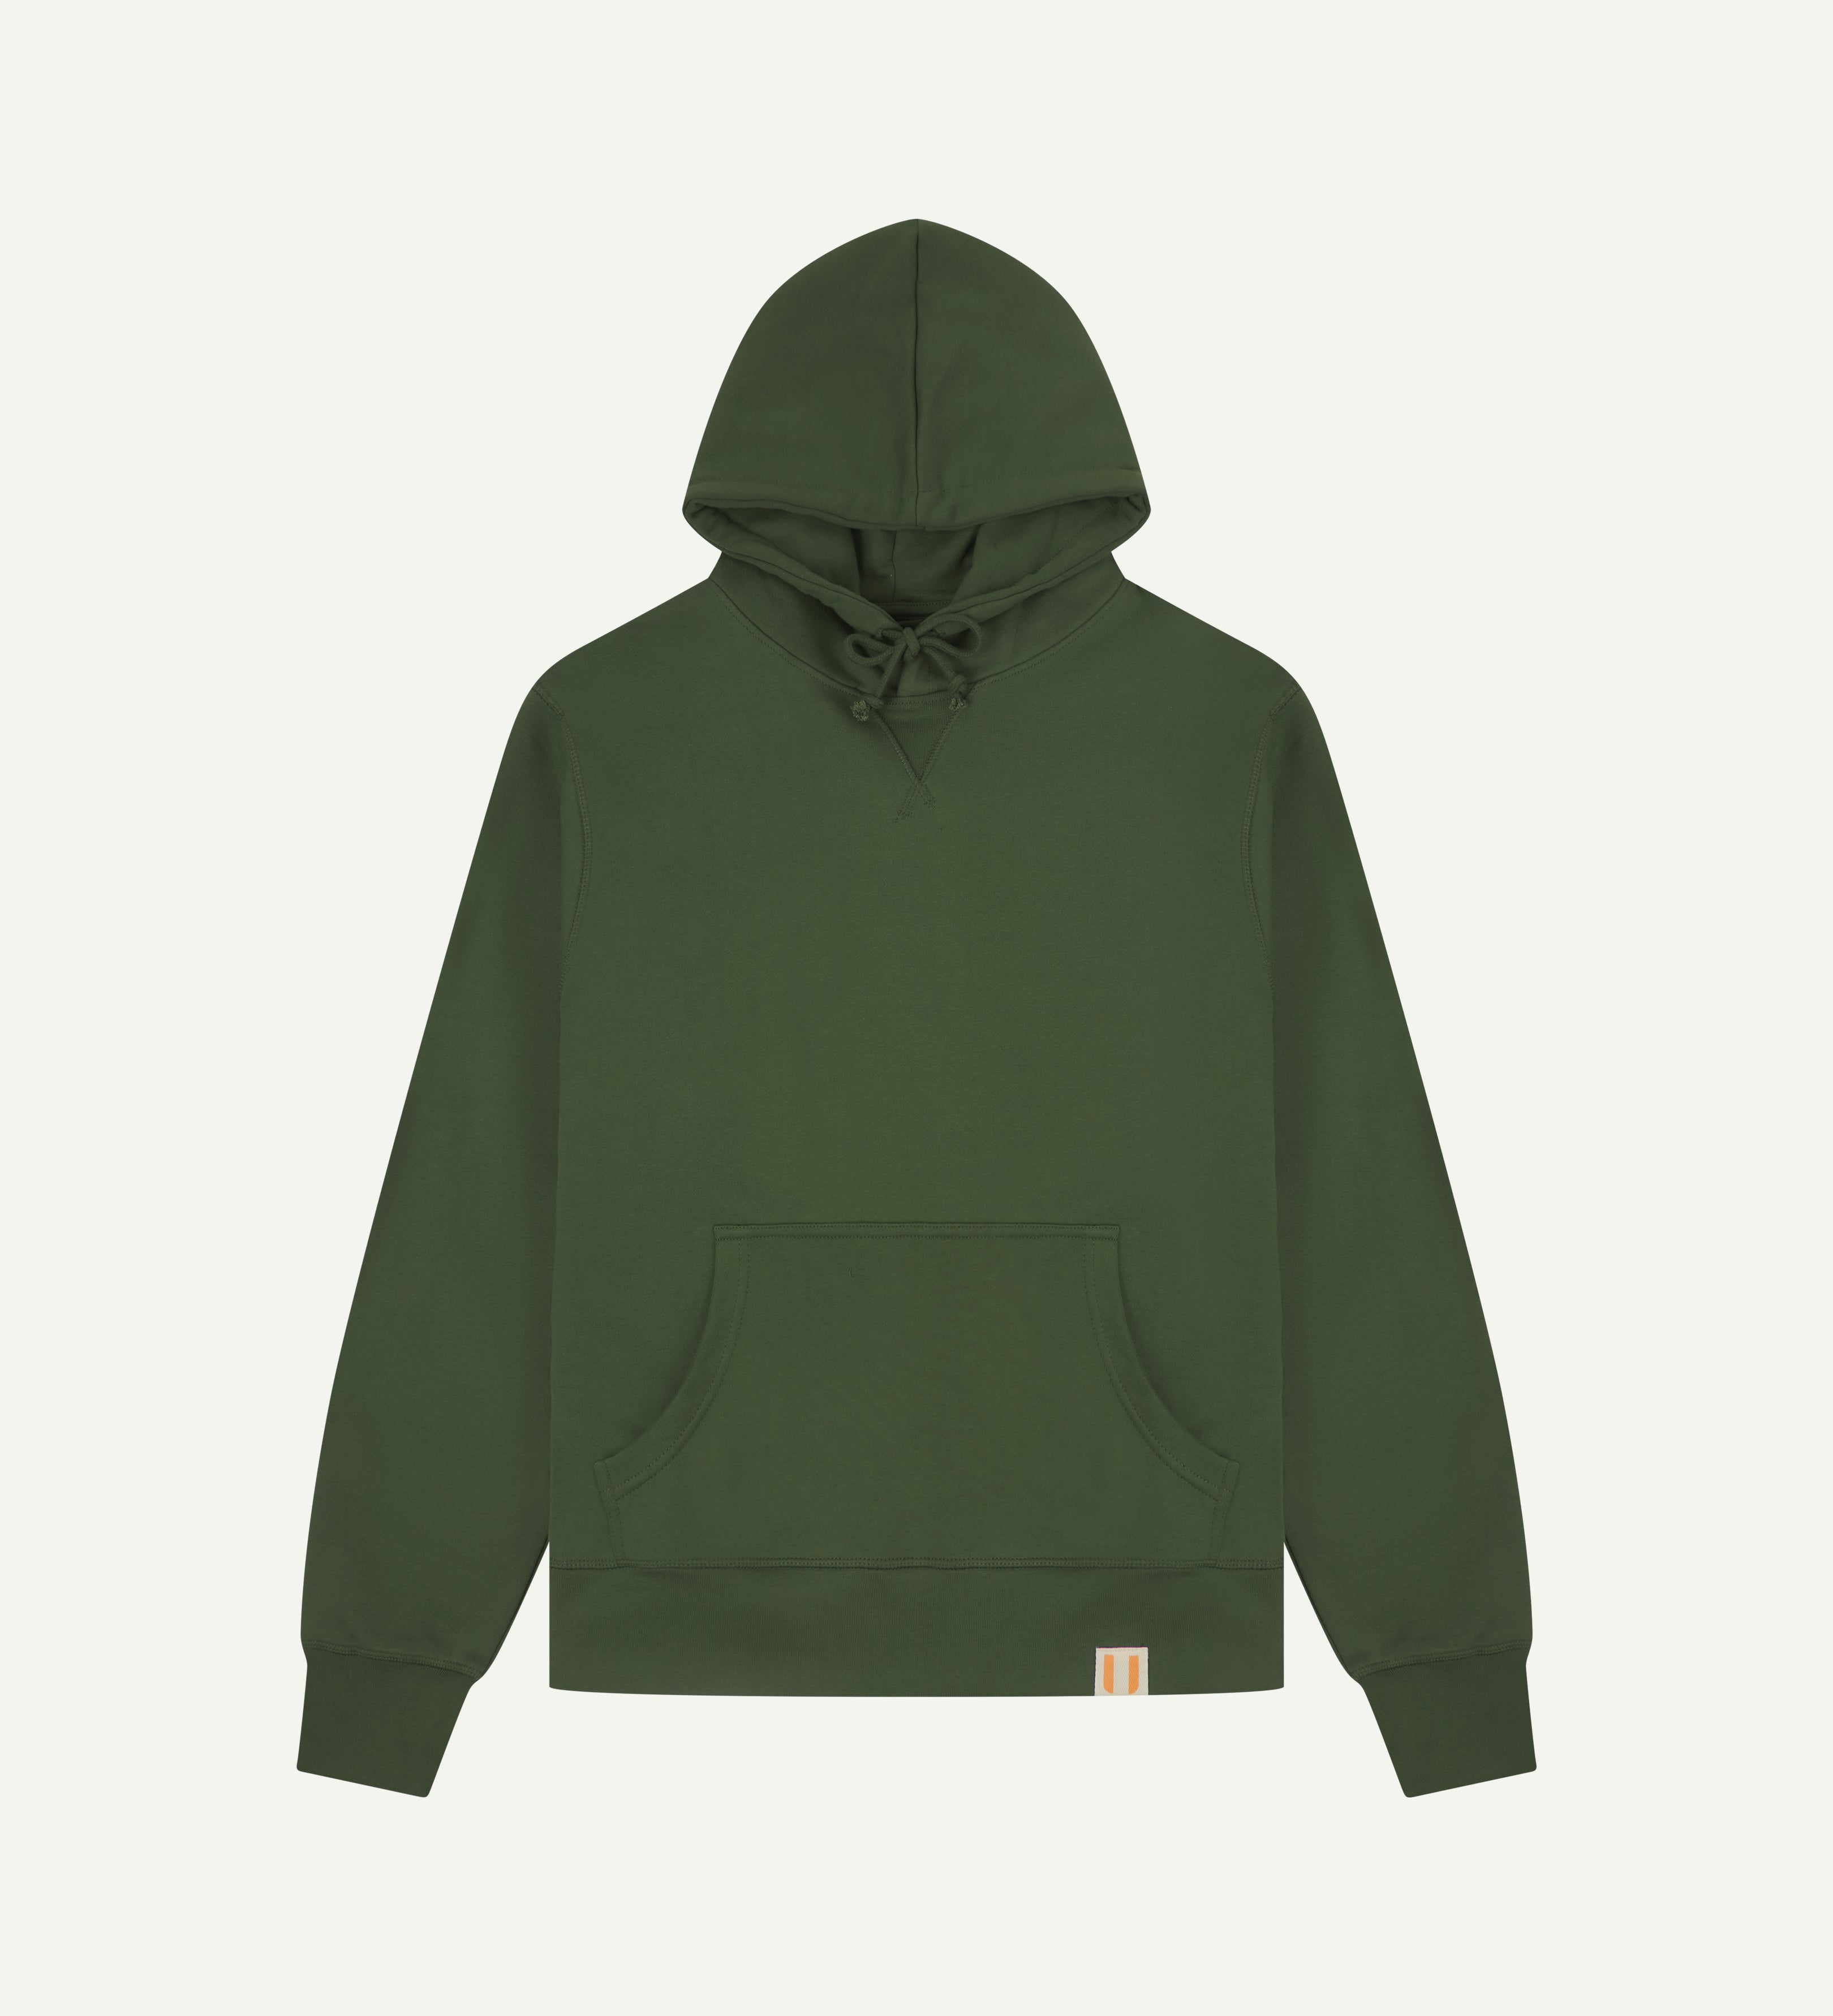 Front flat view of uskees green hoodie for men showing brand logo and kangaroo front pocket